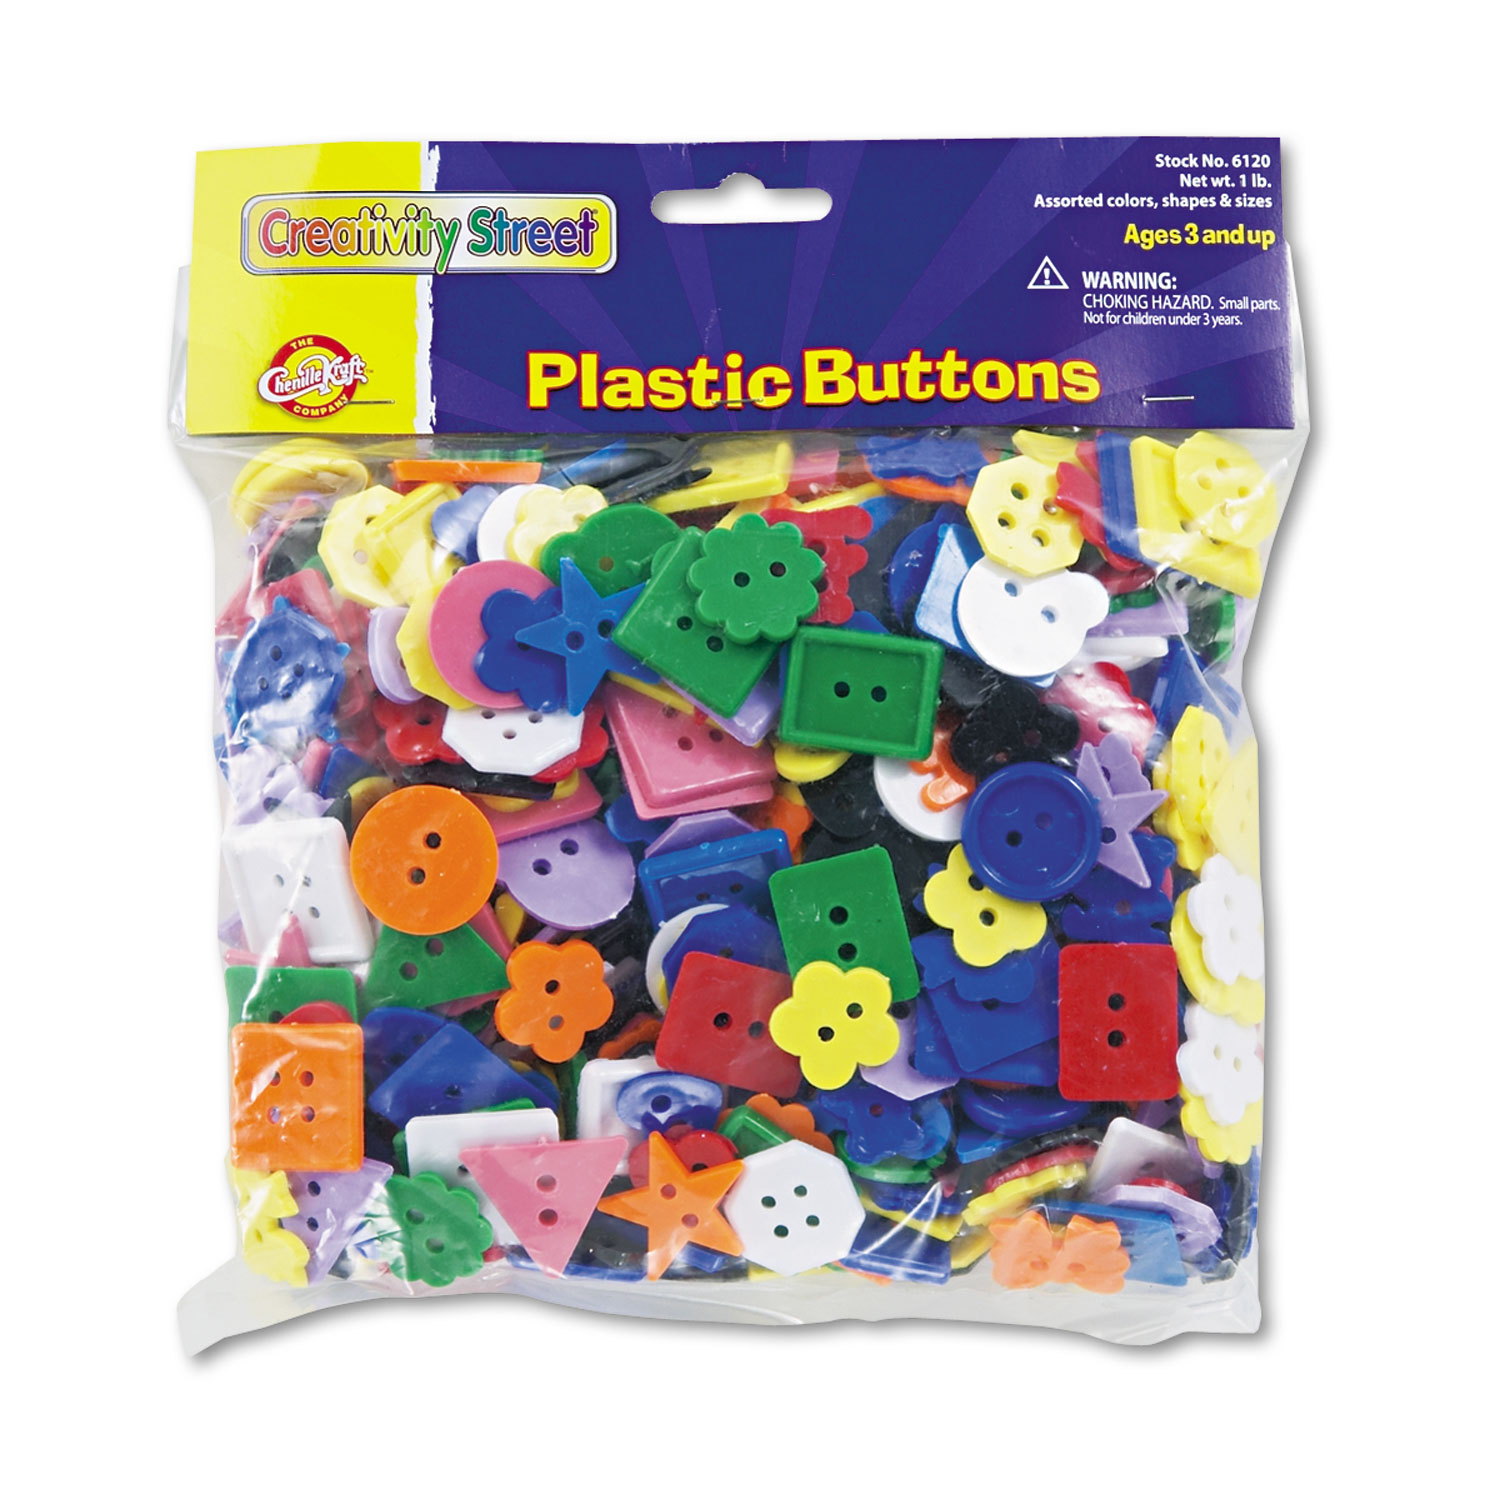 Plastic Button Assortment, 1 lbs., Assorted Colors/Sizes